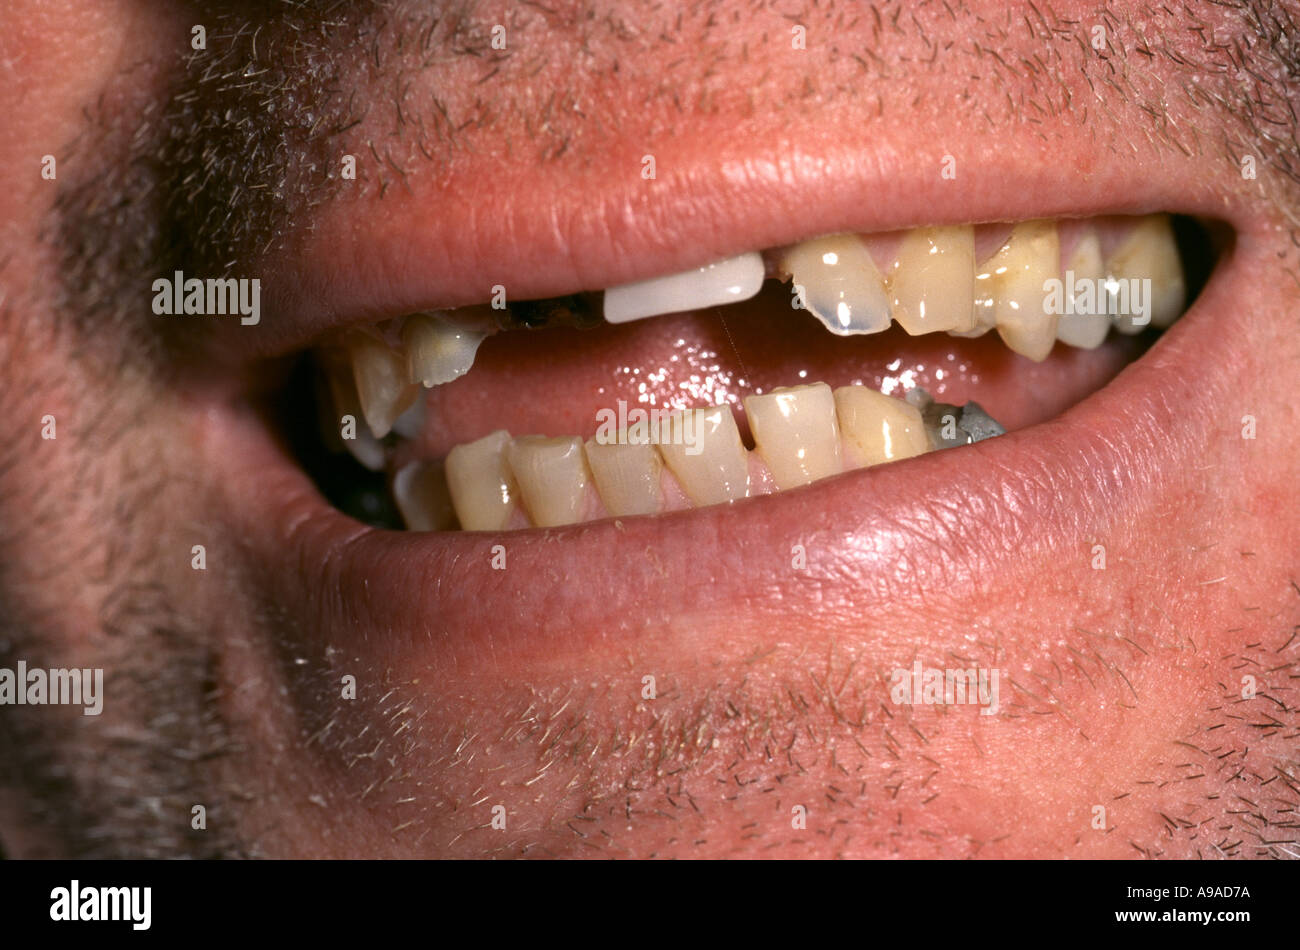 CLOSE UP OF MOUTH OF MAN WITH BAD TEETH Stock Photo